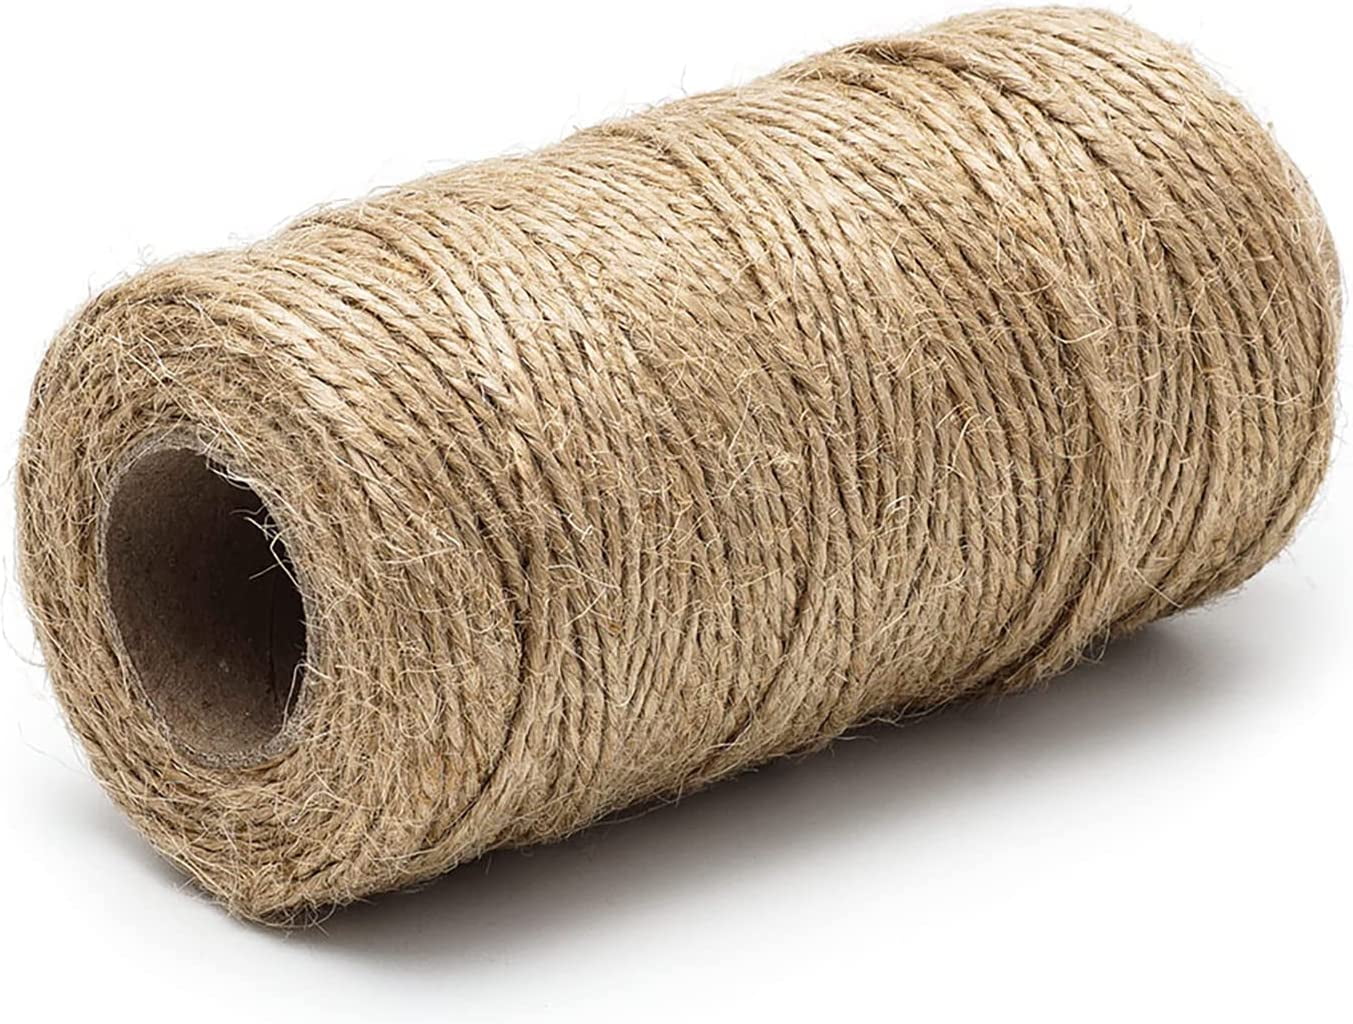 Leisure Arts 4-Ply Natural Floral Jute Rope Cord in Roll - 1LB Reusable 